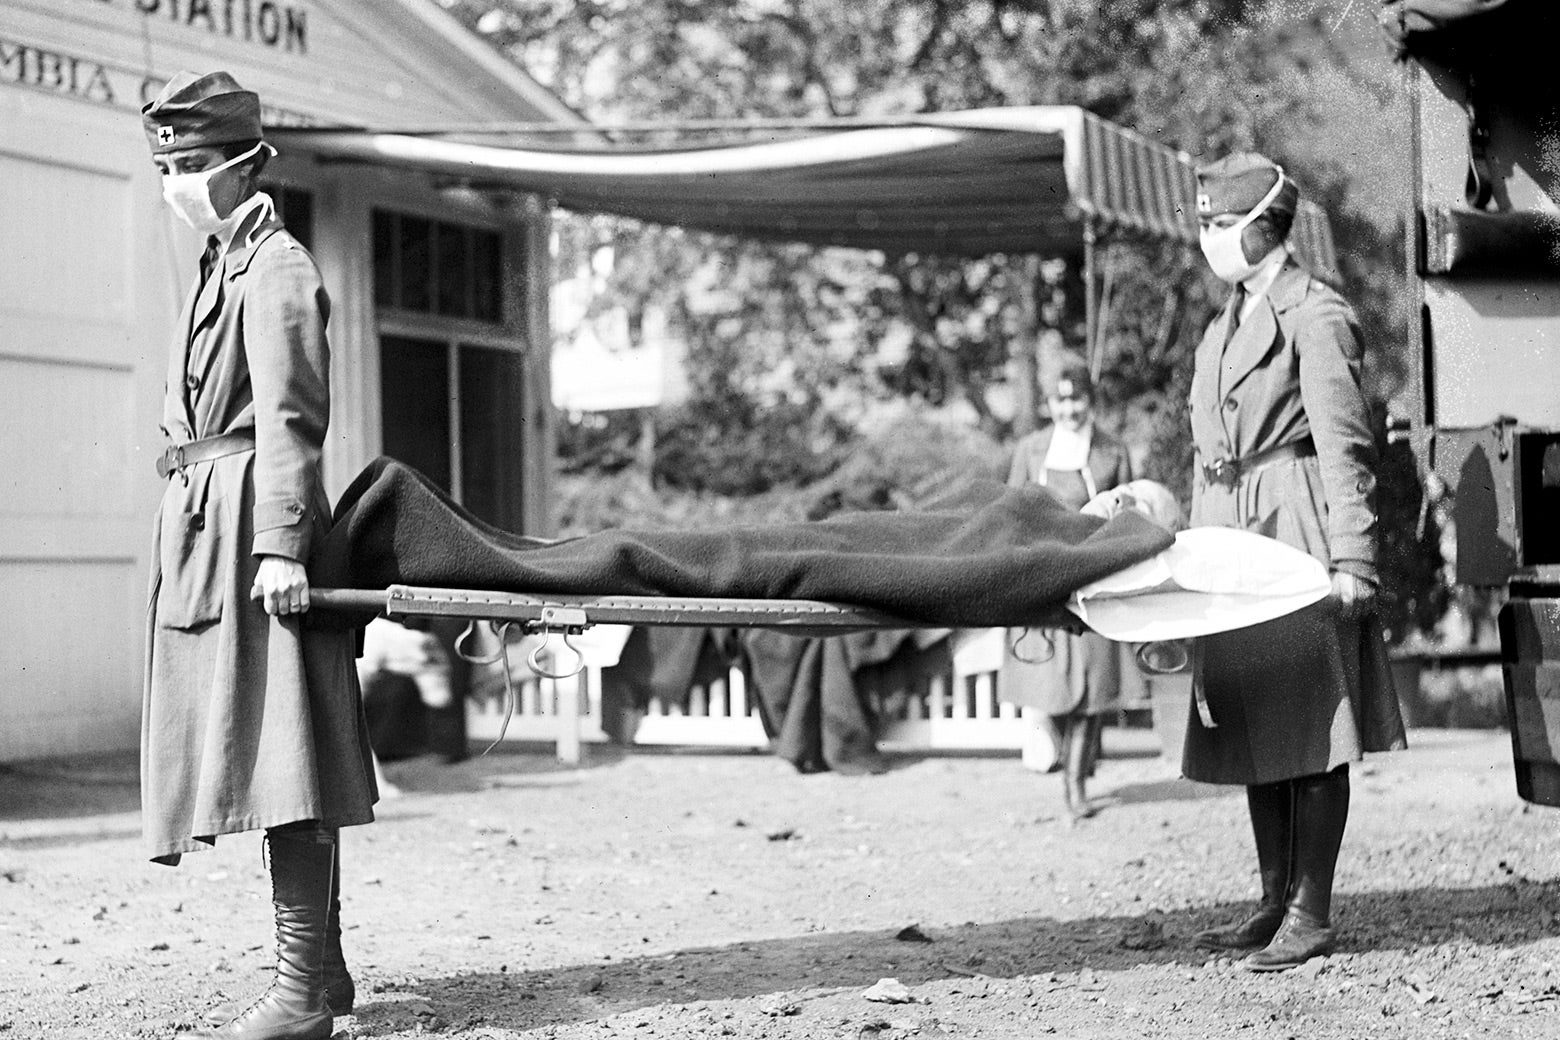 Two Red Cross workers carry a stretcher in a black-and-white photo.